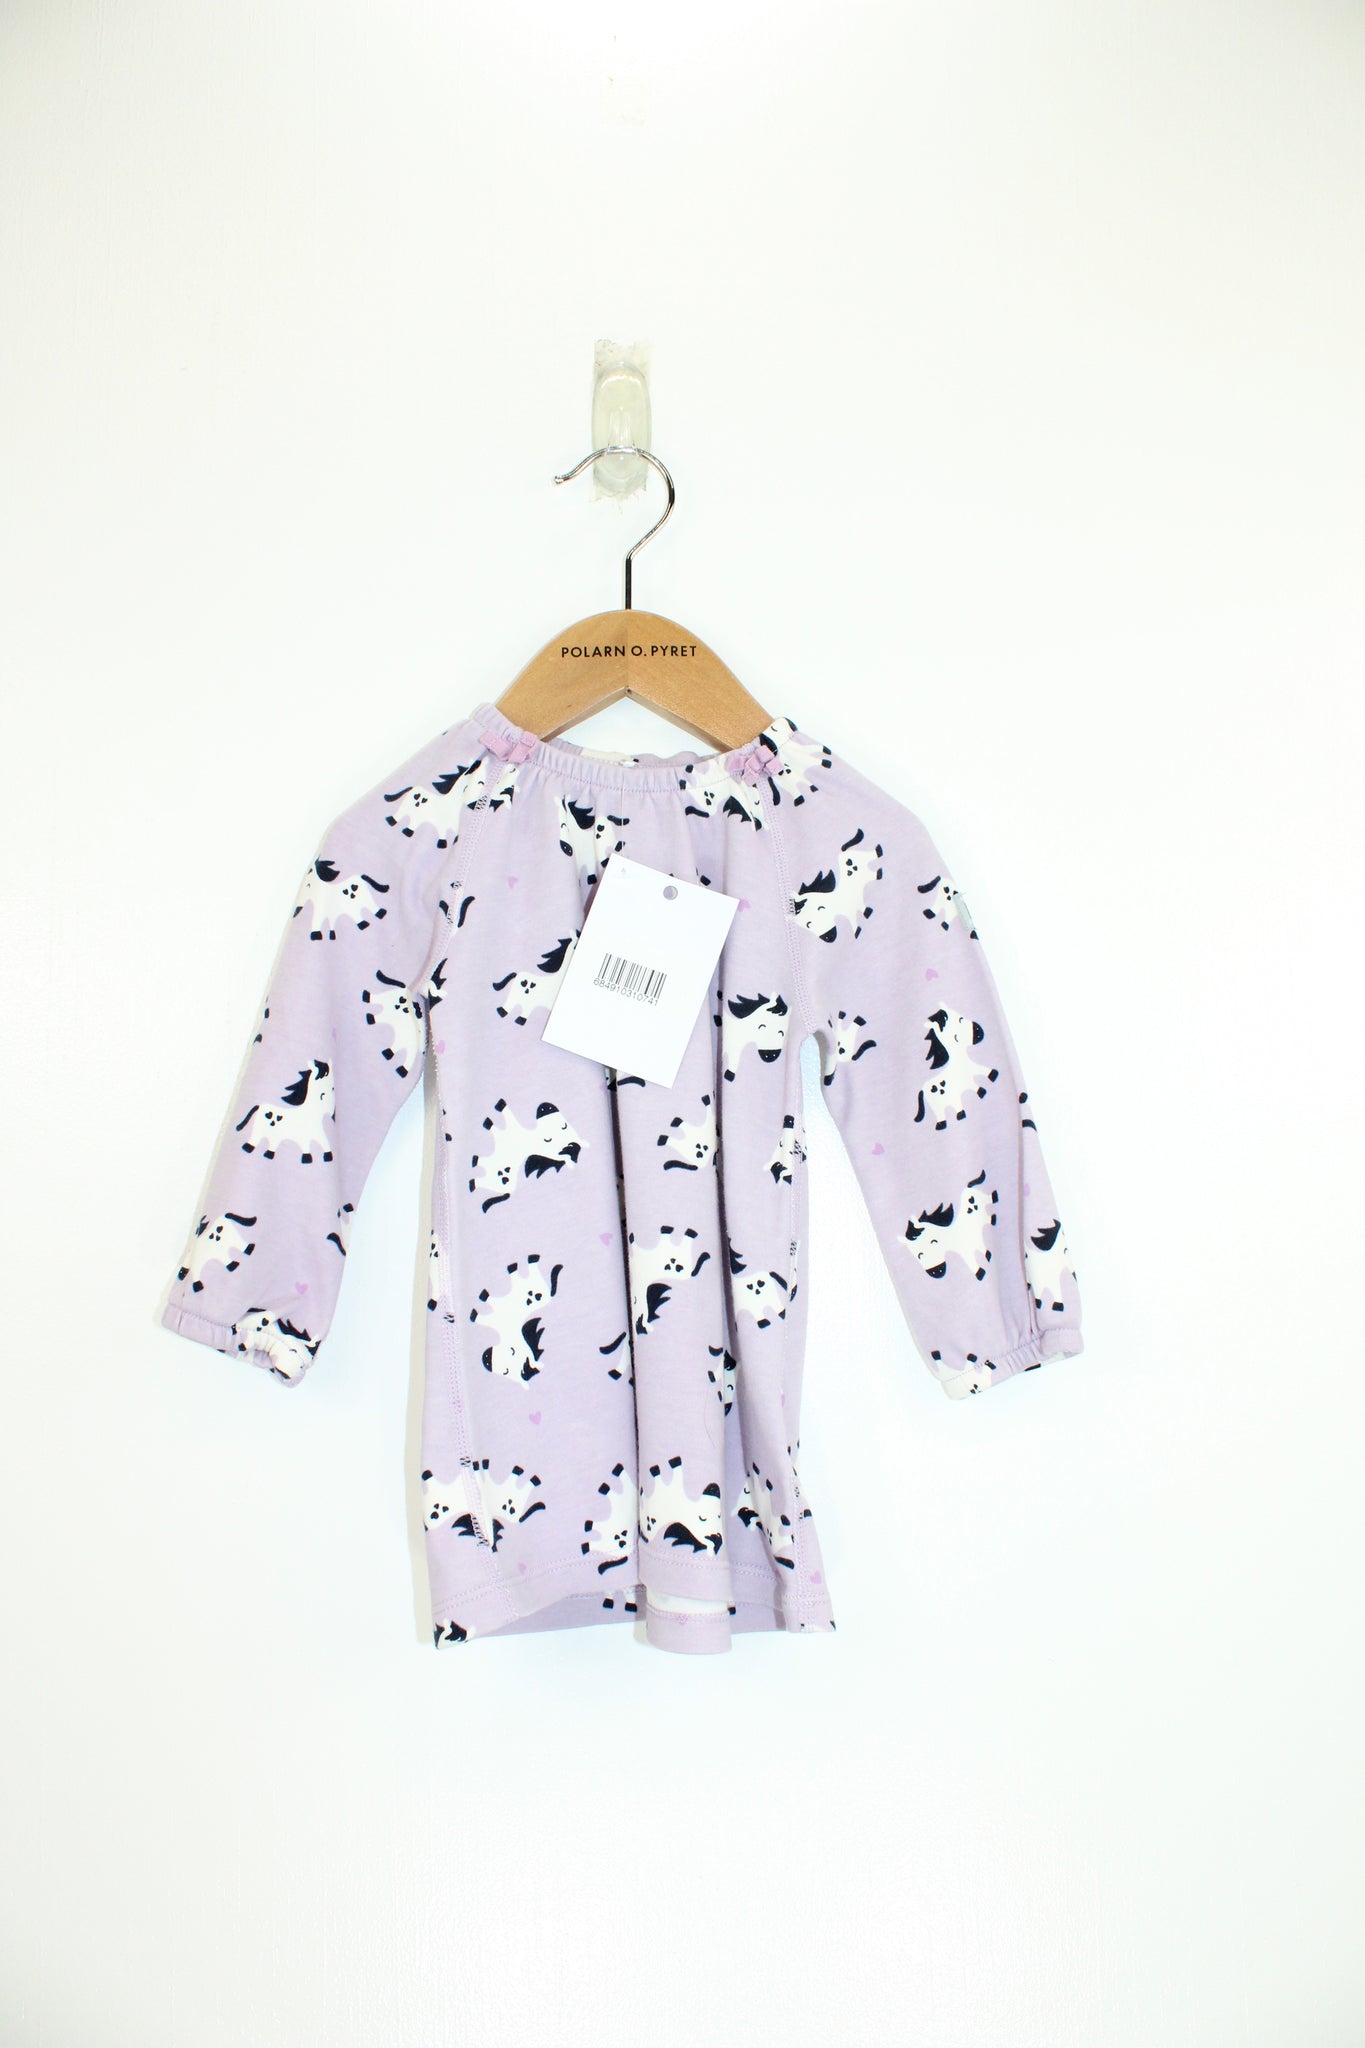 Baby Long Sleeved Top 4-6m / 68